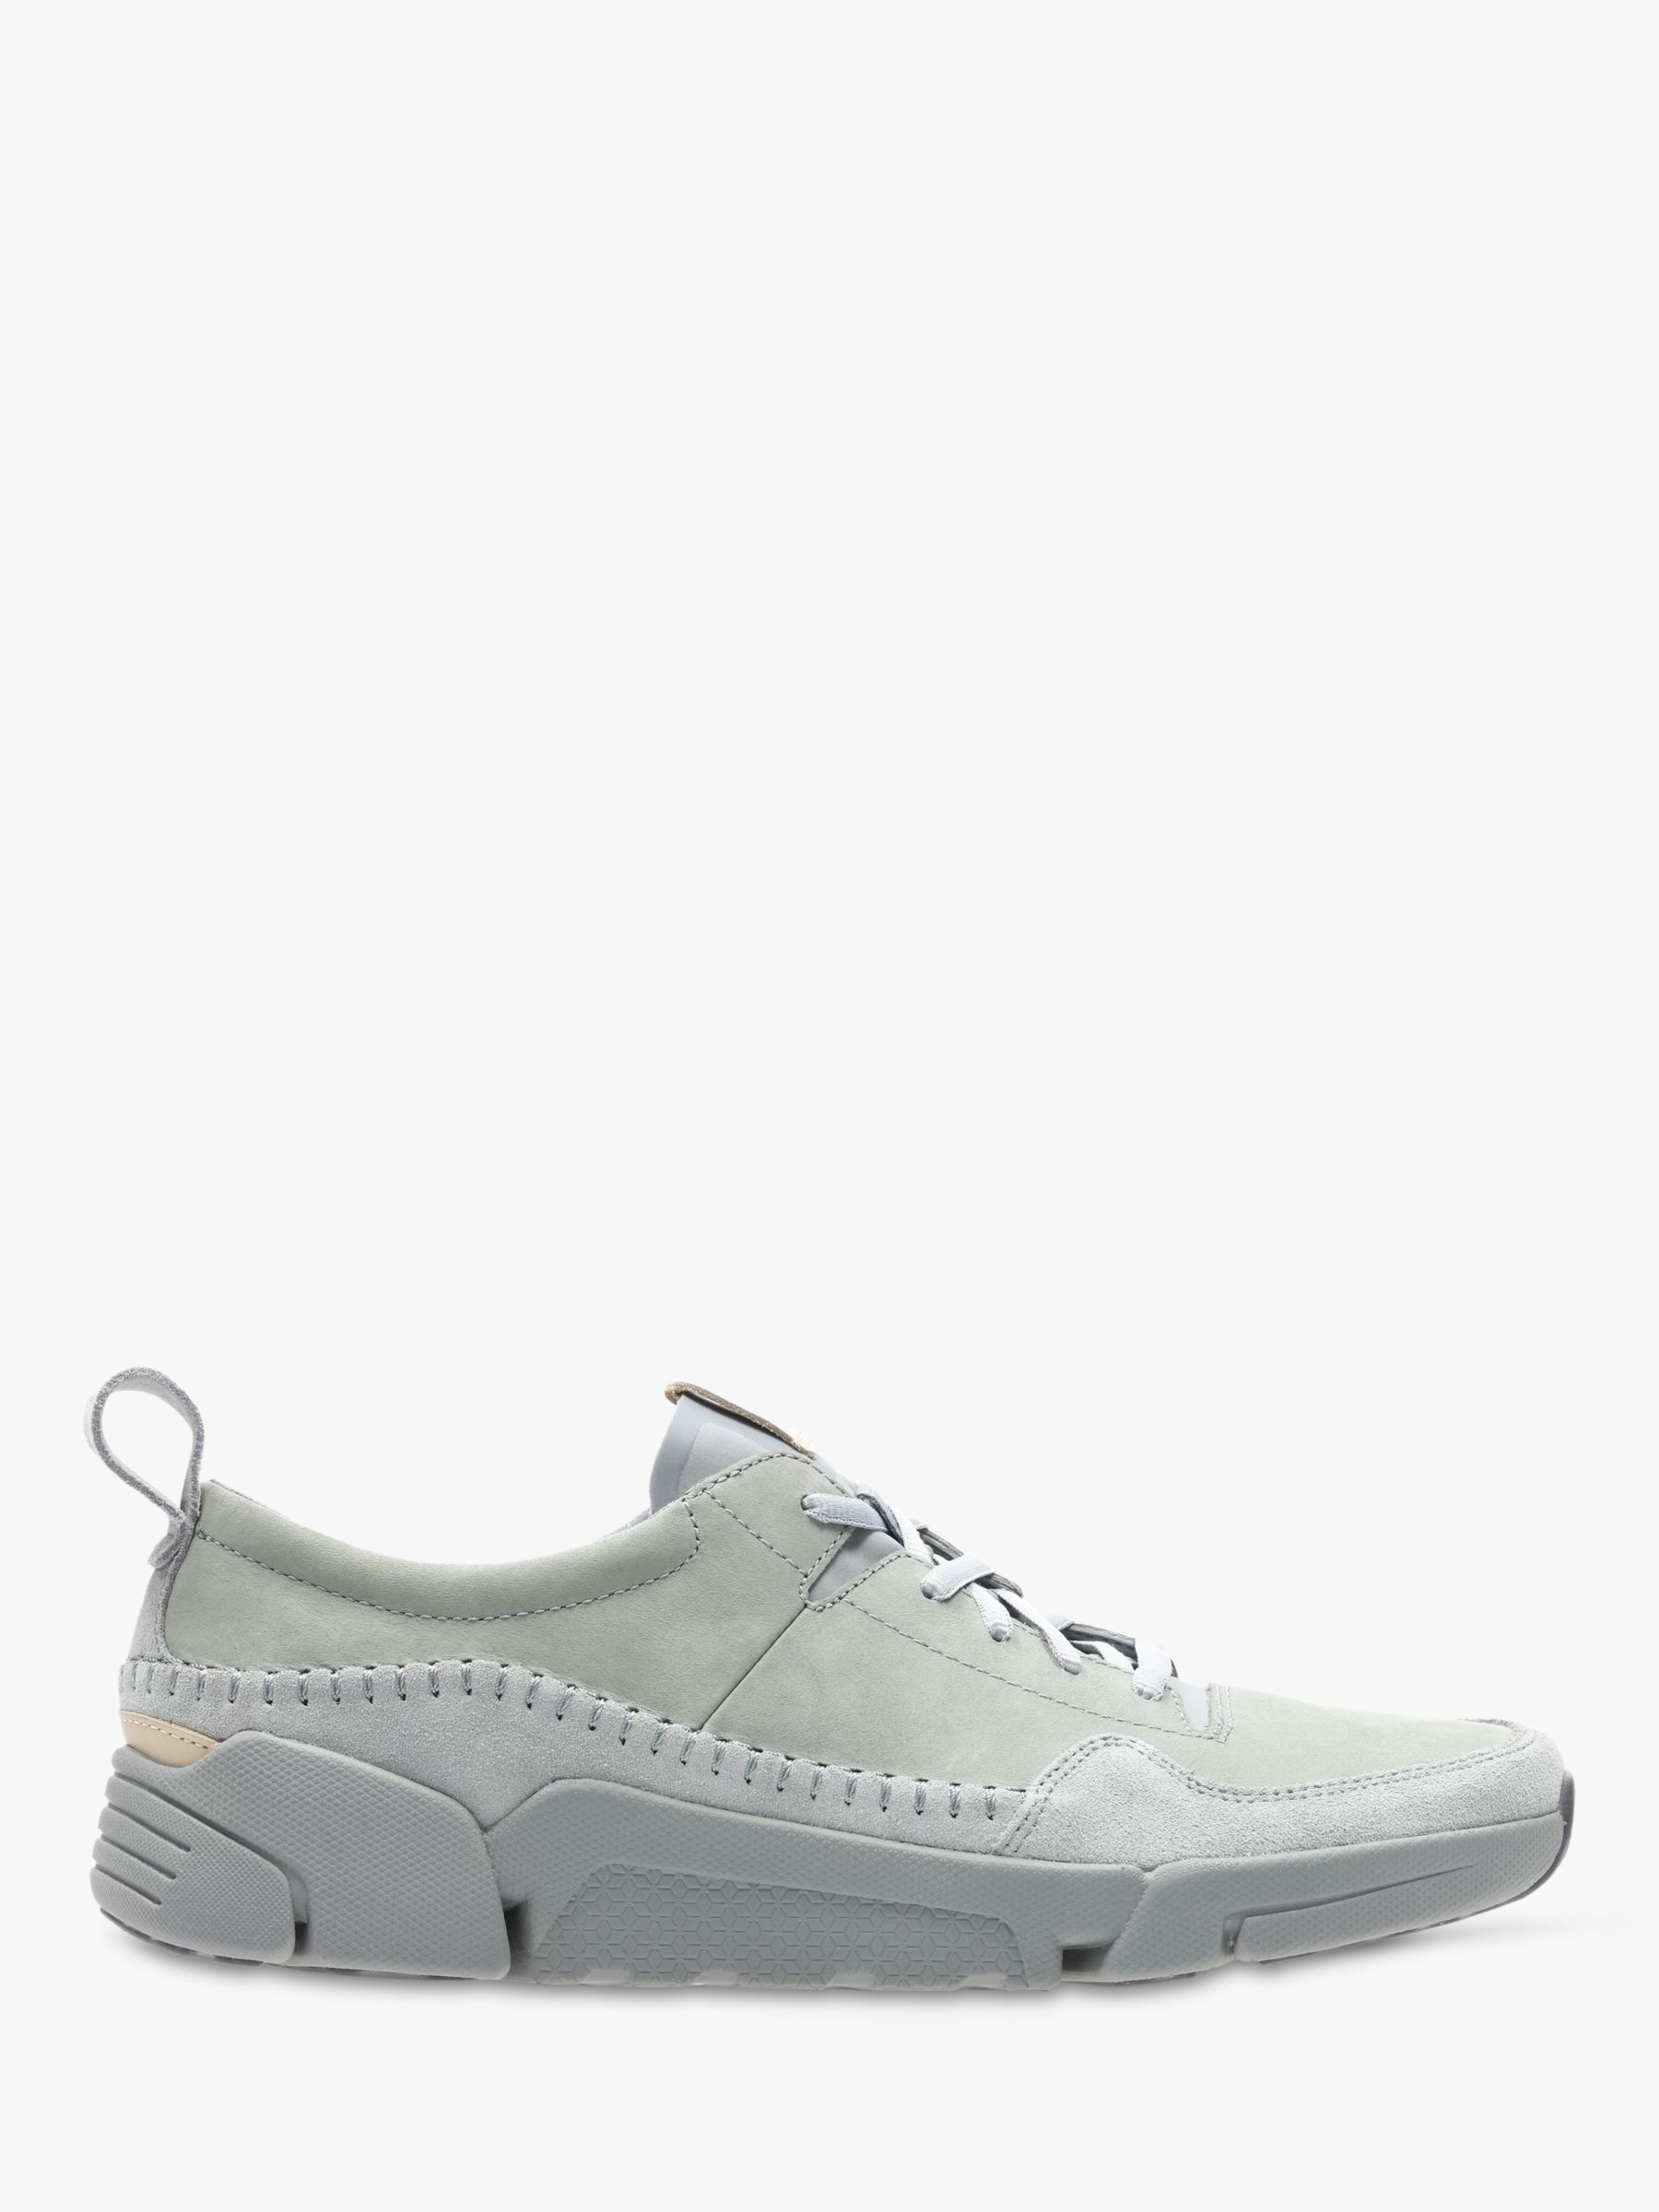 Clarks TriActive Run Leather Trainers 